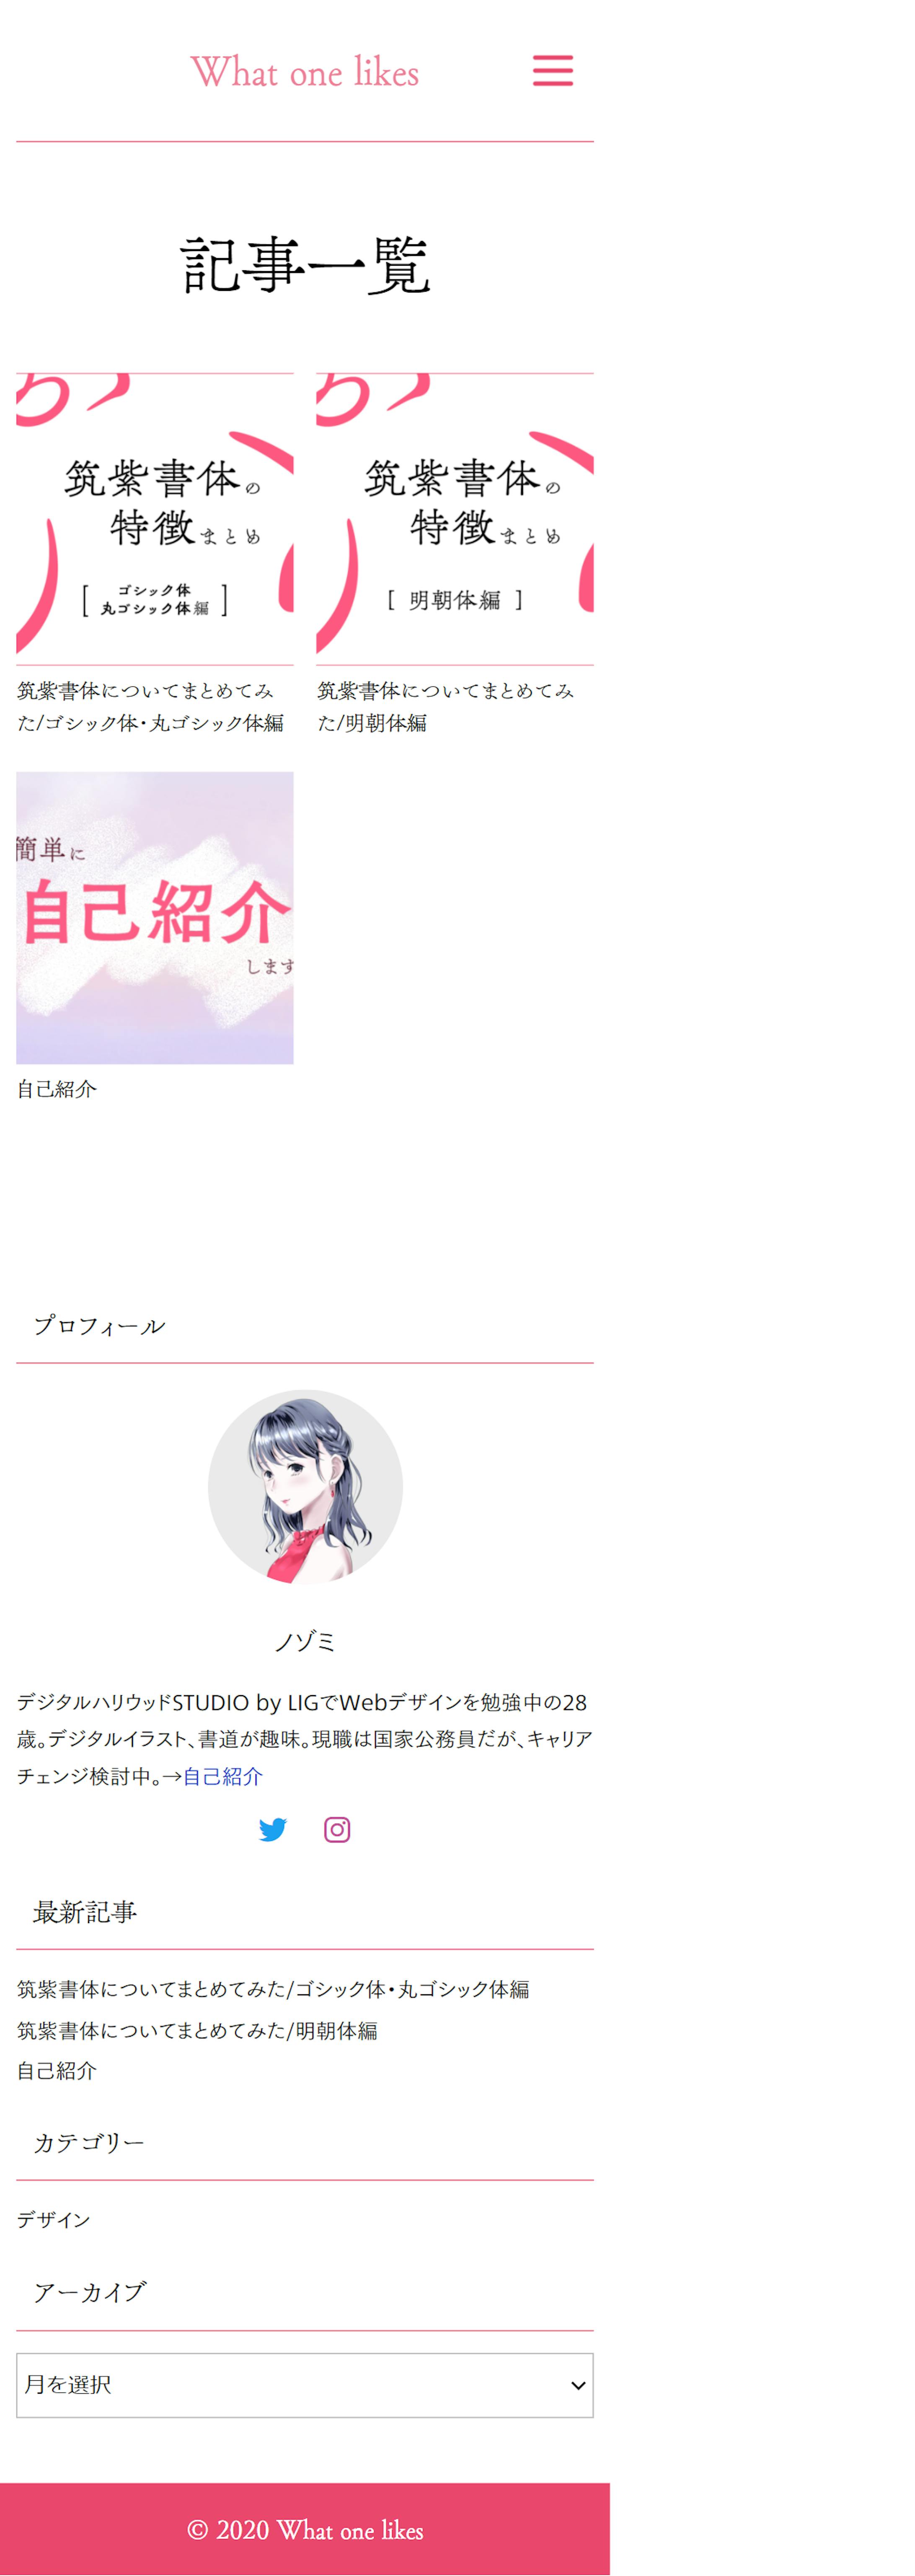 「What one likes」ブログサイト-3